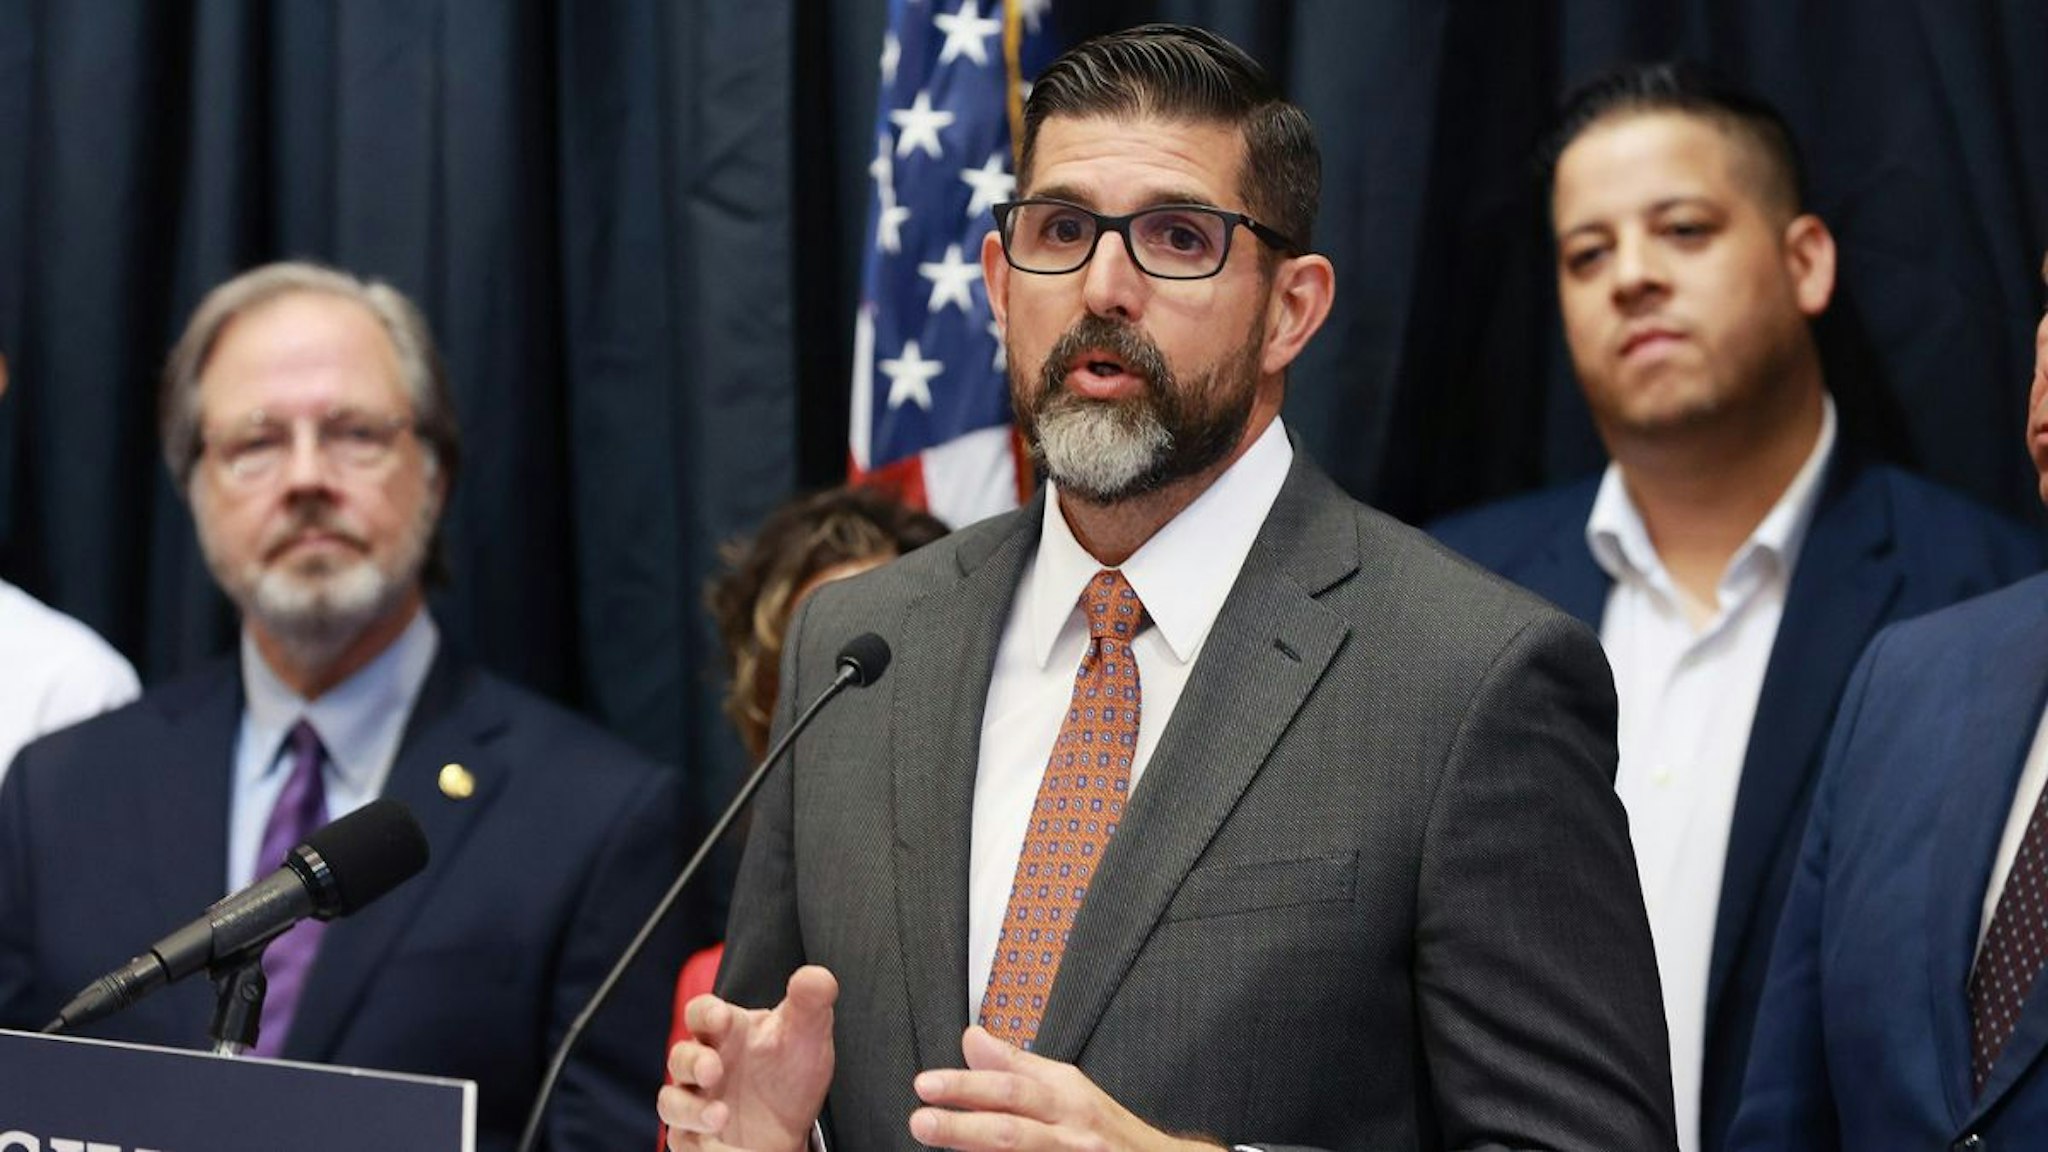 Florida Education Commissioner Manny Diaz Jr., speaks at a news conference at Crooms Academy of Information Technology on June 30, 2022, in Sanford, Florida, where Florida Gov. DeSantis announced a new civics education program.